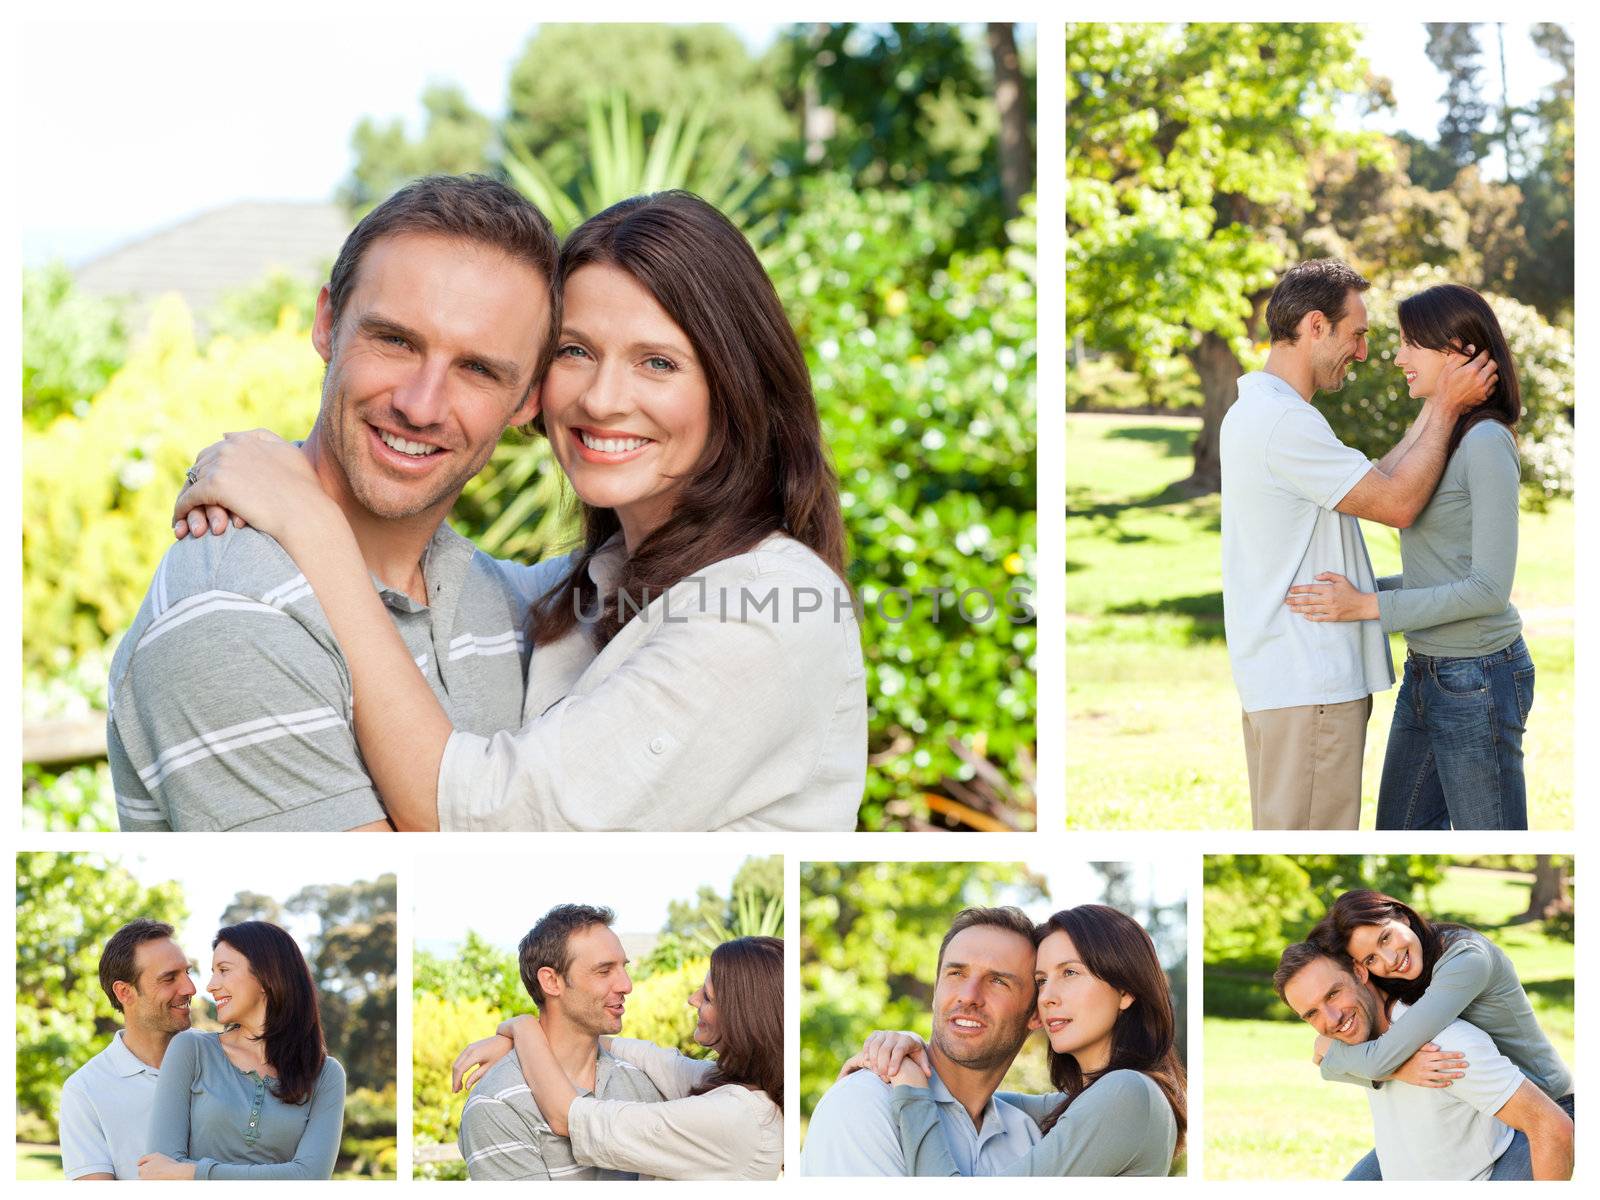 Collage of a lovely couple enjoying a moment together in a park by Wavebreakmedia